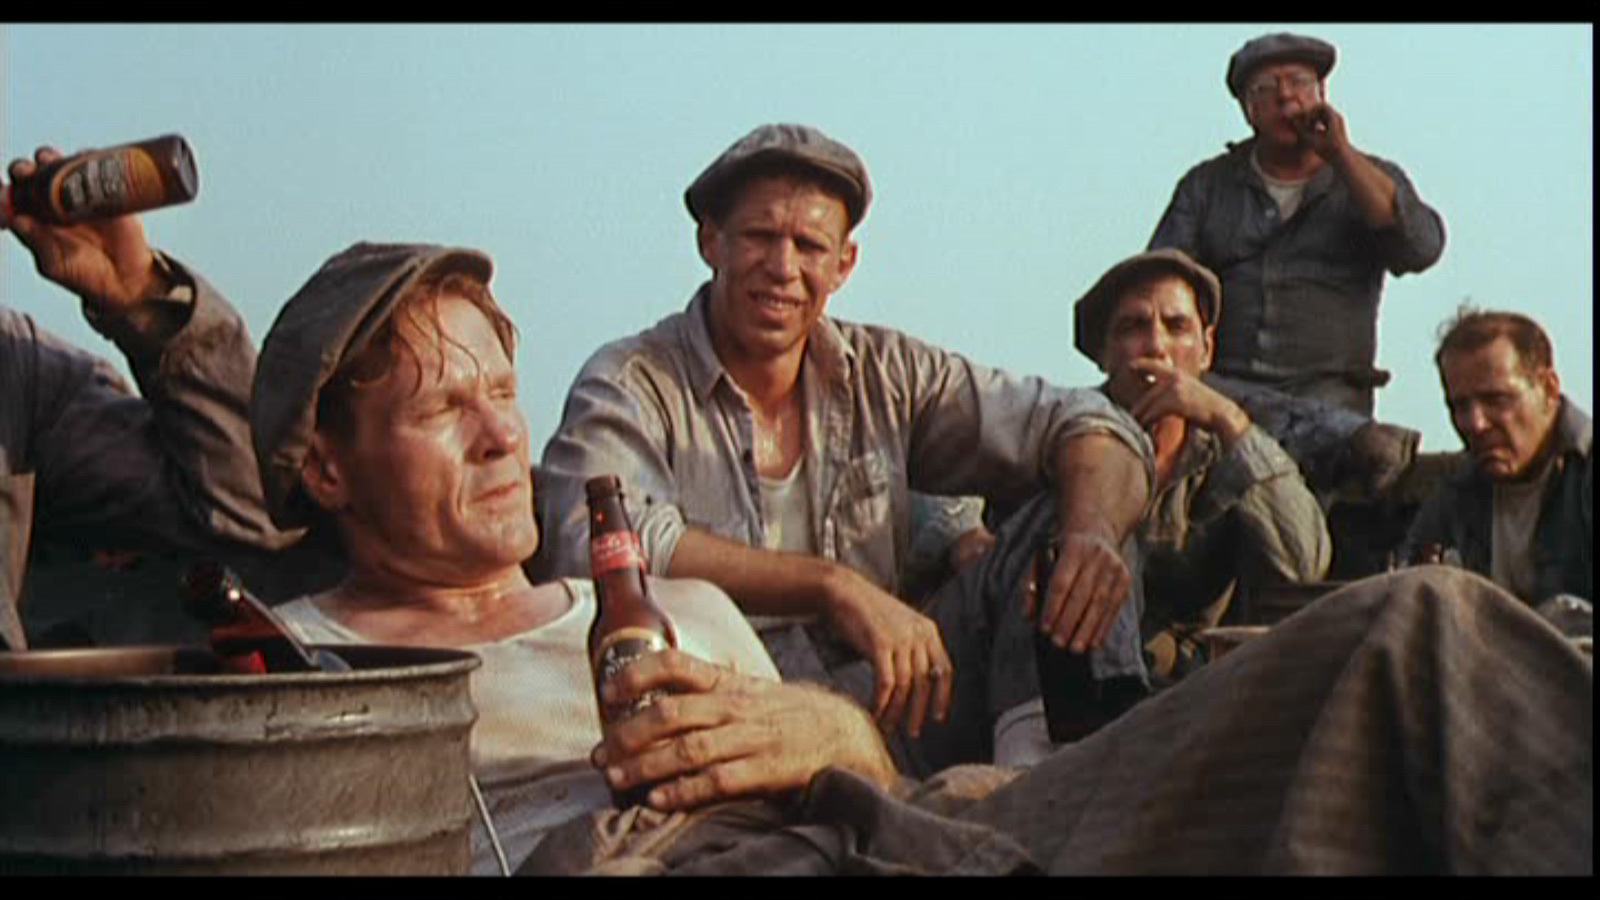 The Shawshank Redemption Image - ID: 139387 - Image Abyss